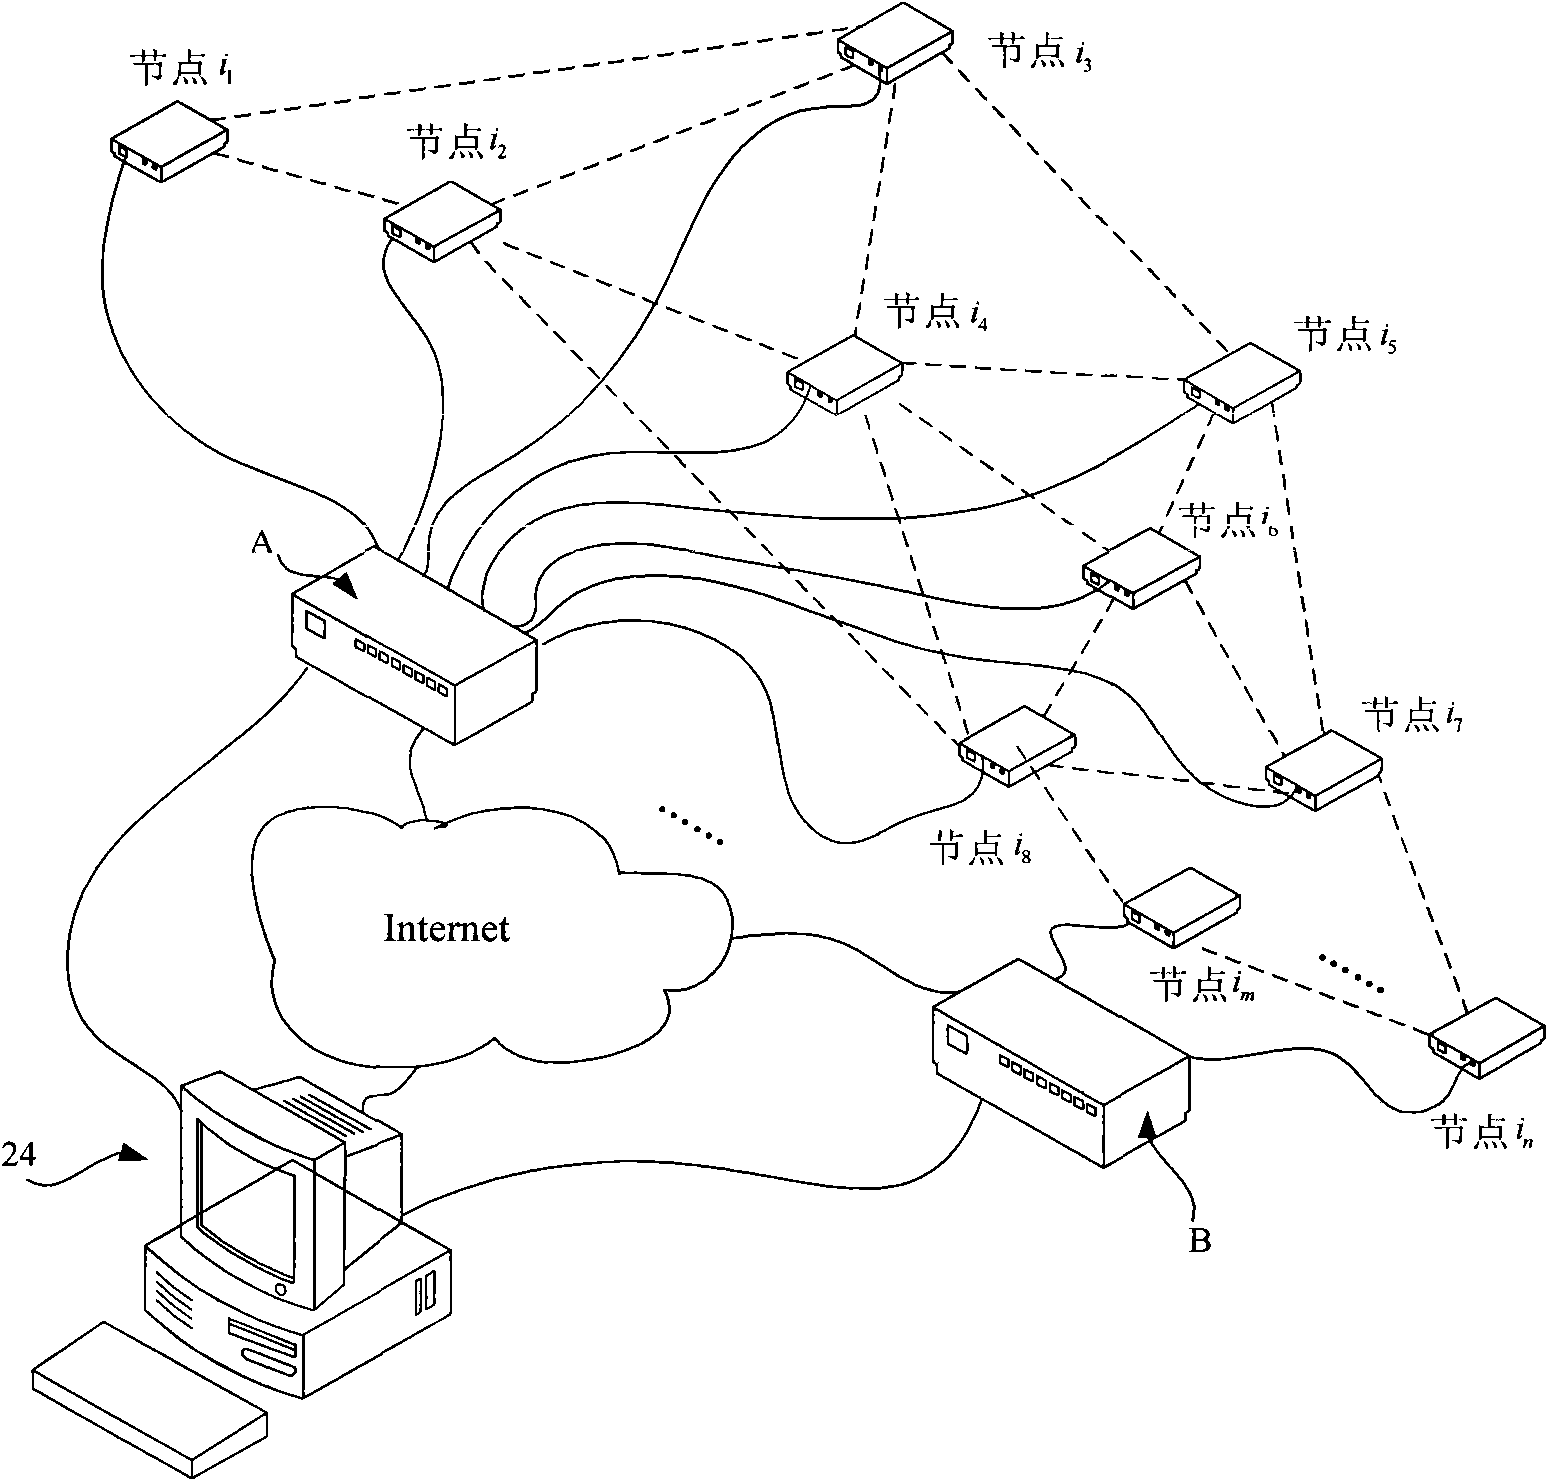 Analysis and test device for nodes in wireless sensor network